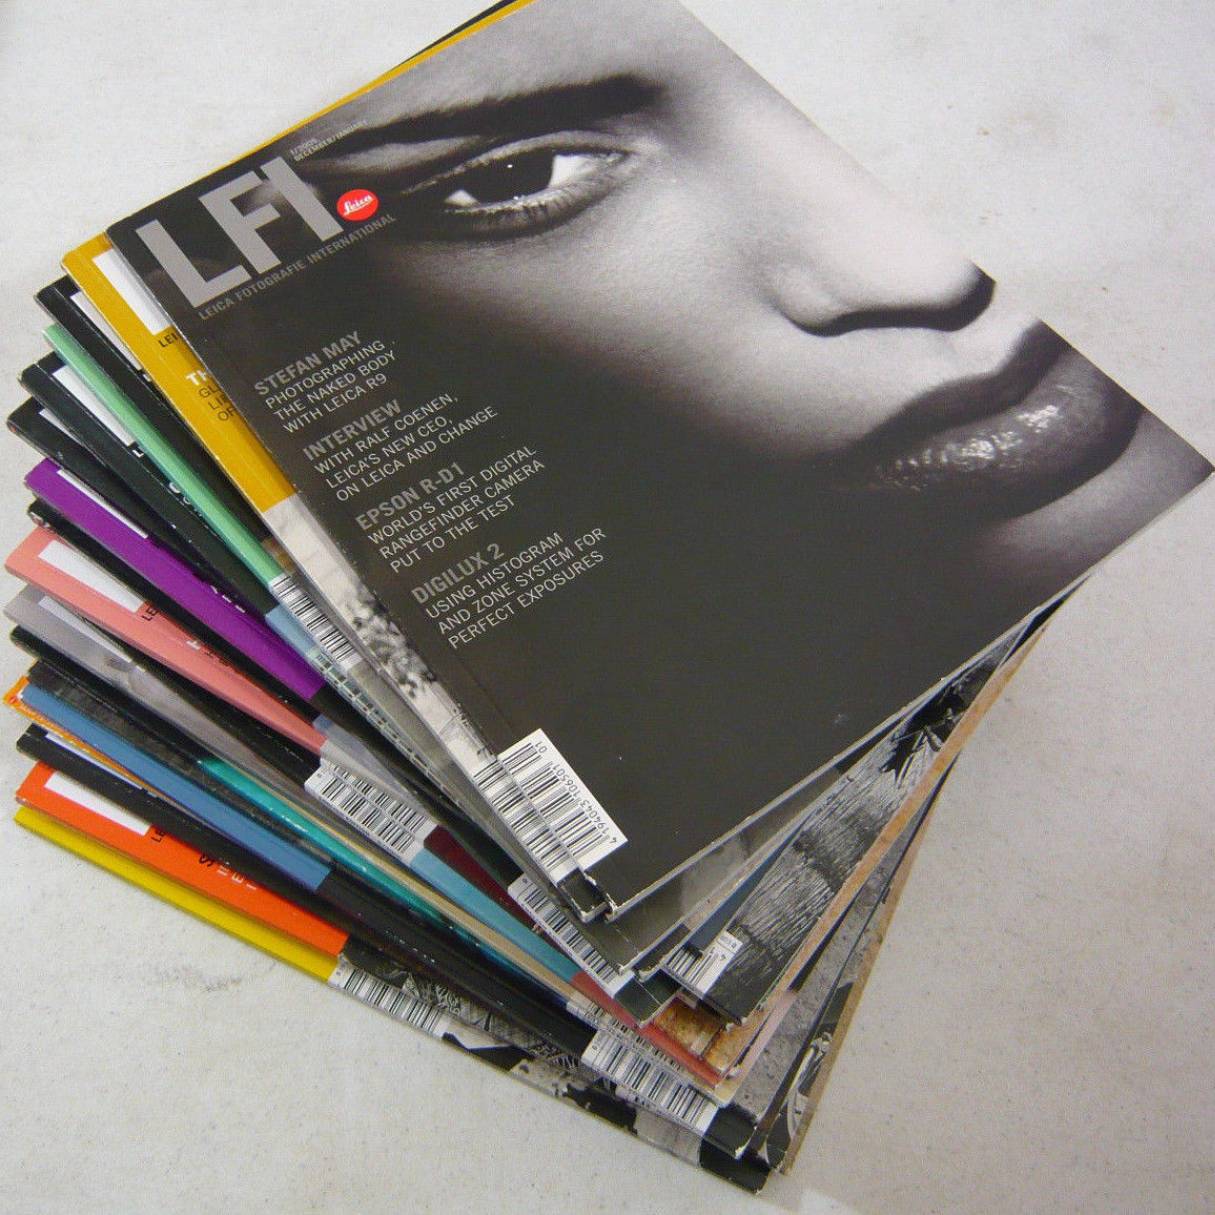 How To Store Old Magazines